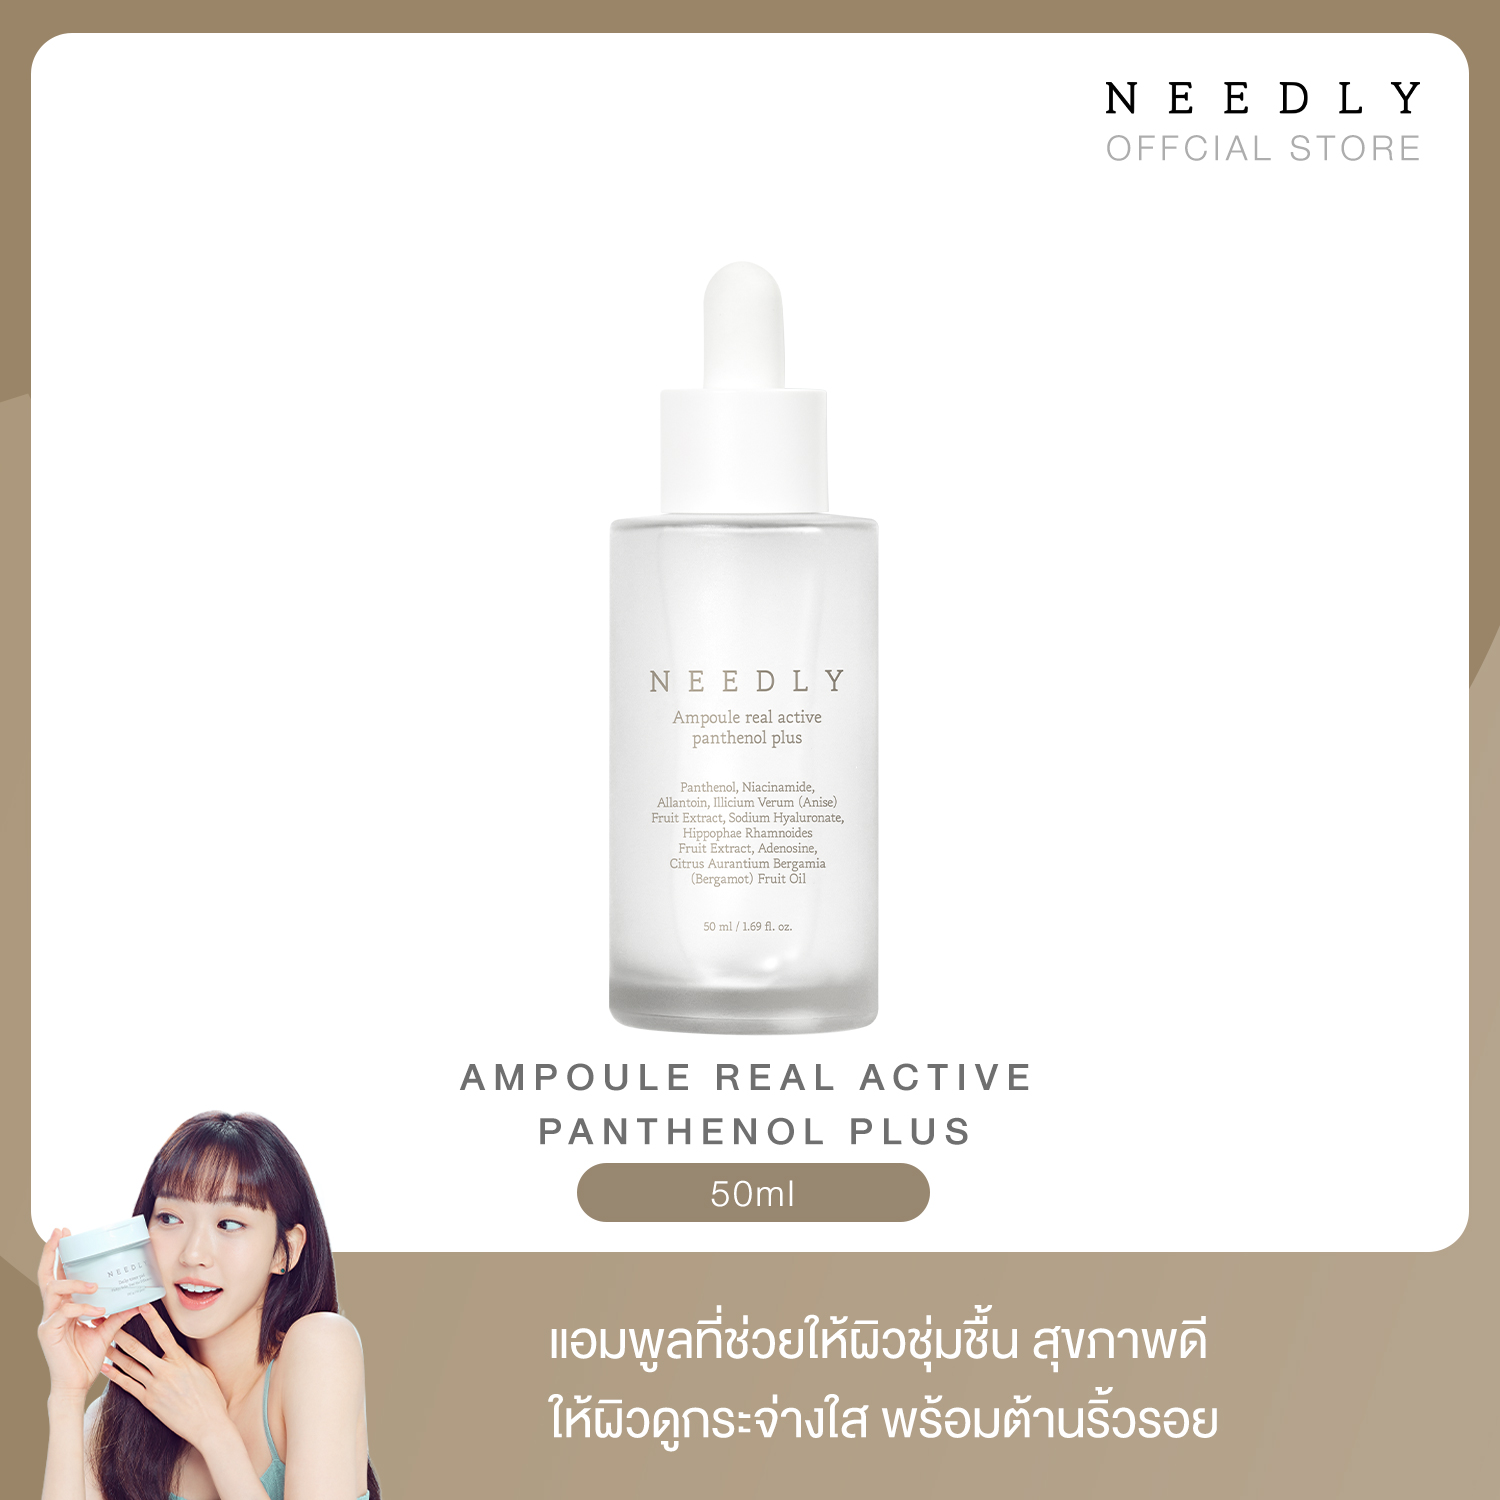 NEEDLY AMPOULE REAL ACTIVE PANTHENOL PLUS 50ml แอมพูล NEEDLY